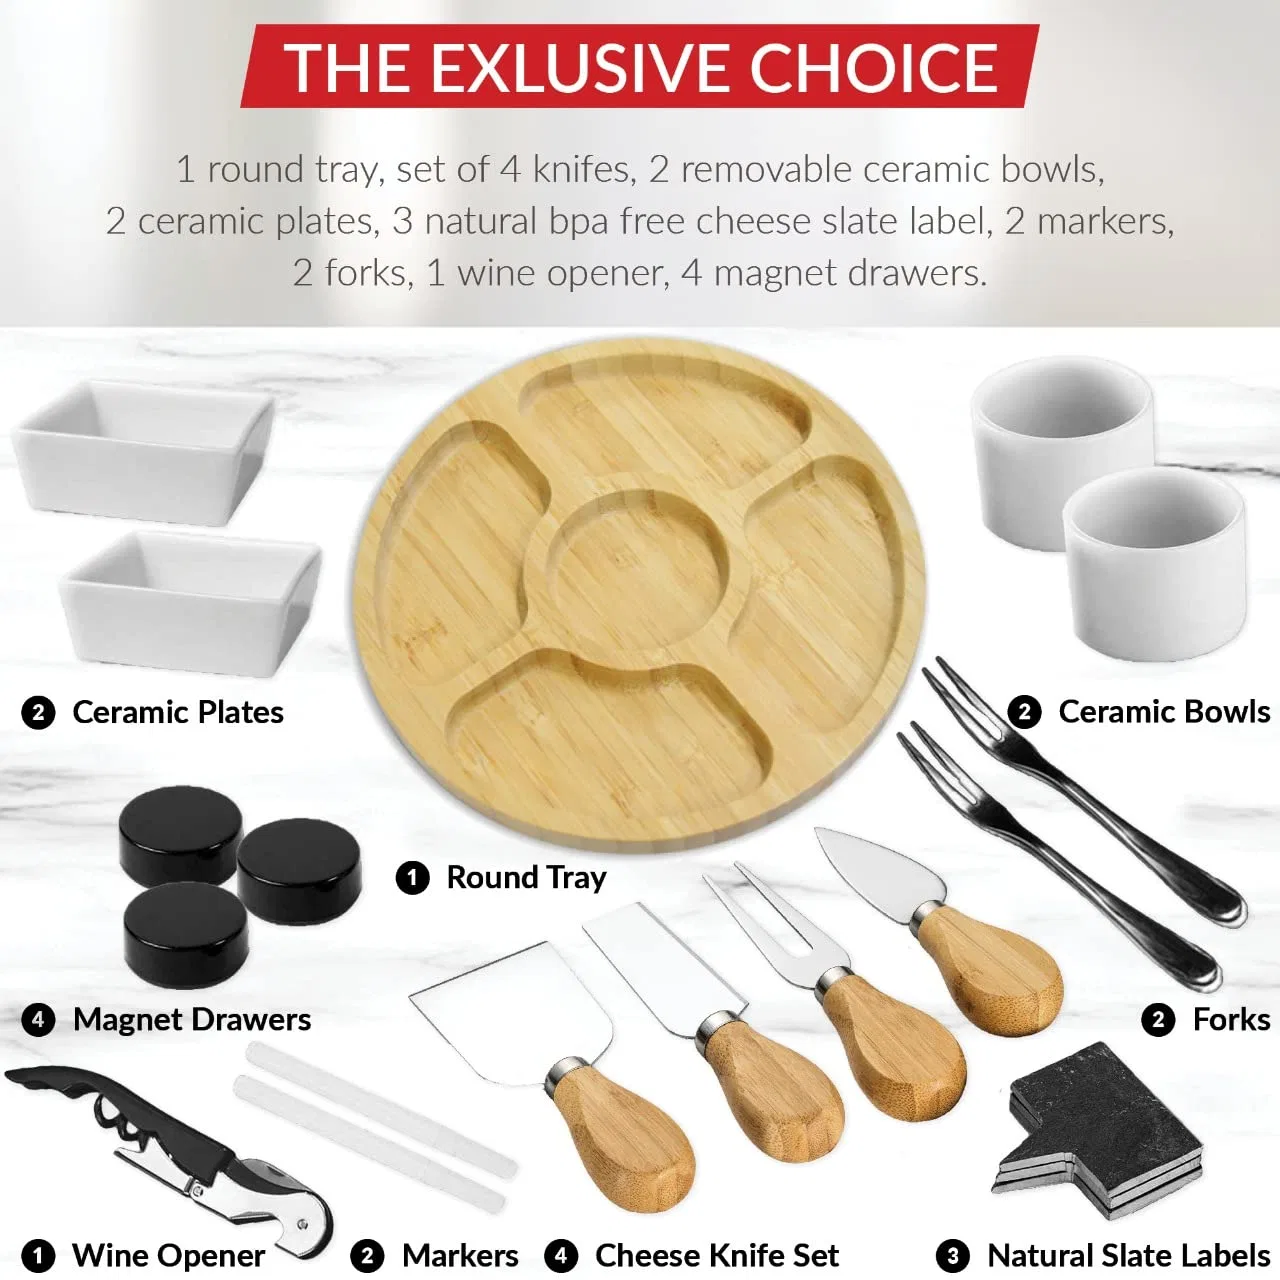 Cheese Board 2 Ceramic Bowls 2 Serving Plates. Magnetic 4 Drawers Bamboo Charcuterie Cutlery Knife Set, 2 Server Forks, Wine Opener, Labels, Markers, GIF